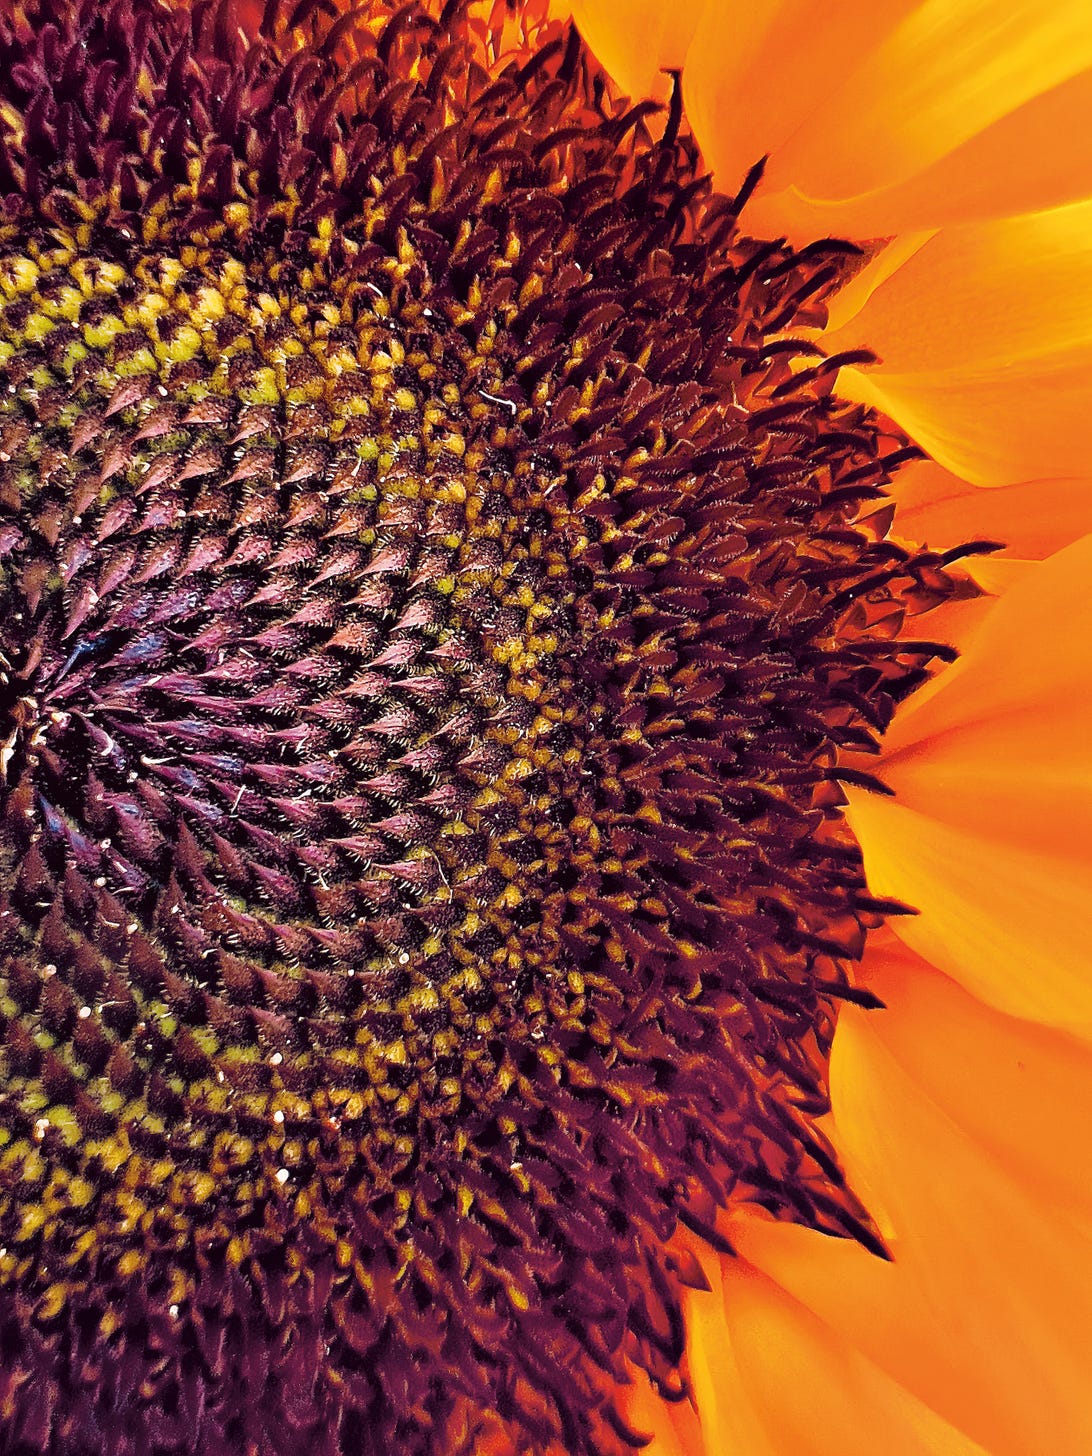 A detailed photo of the seeds of a sunflower.